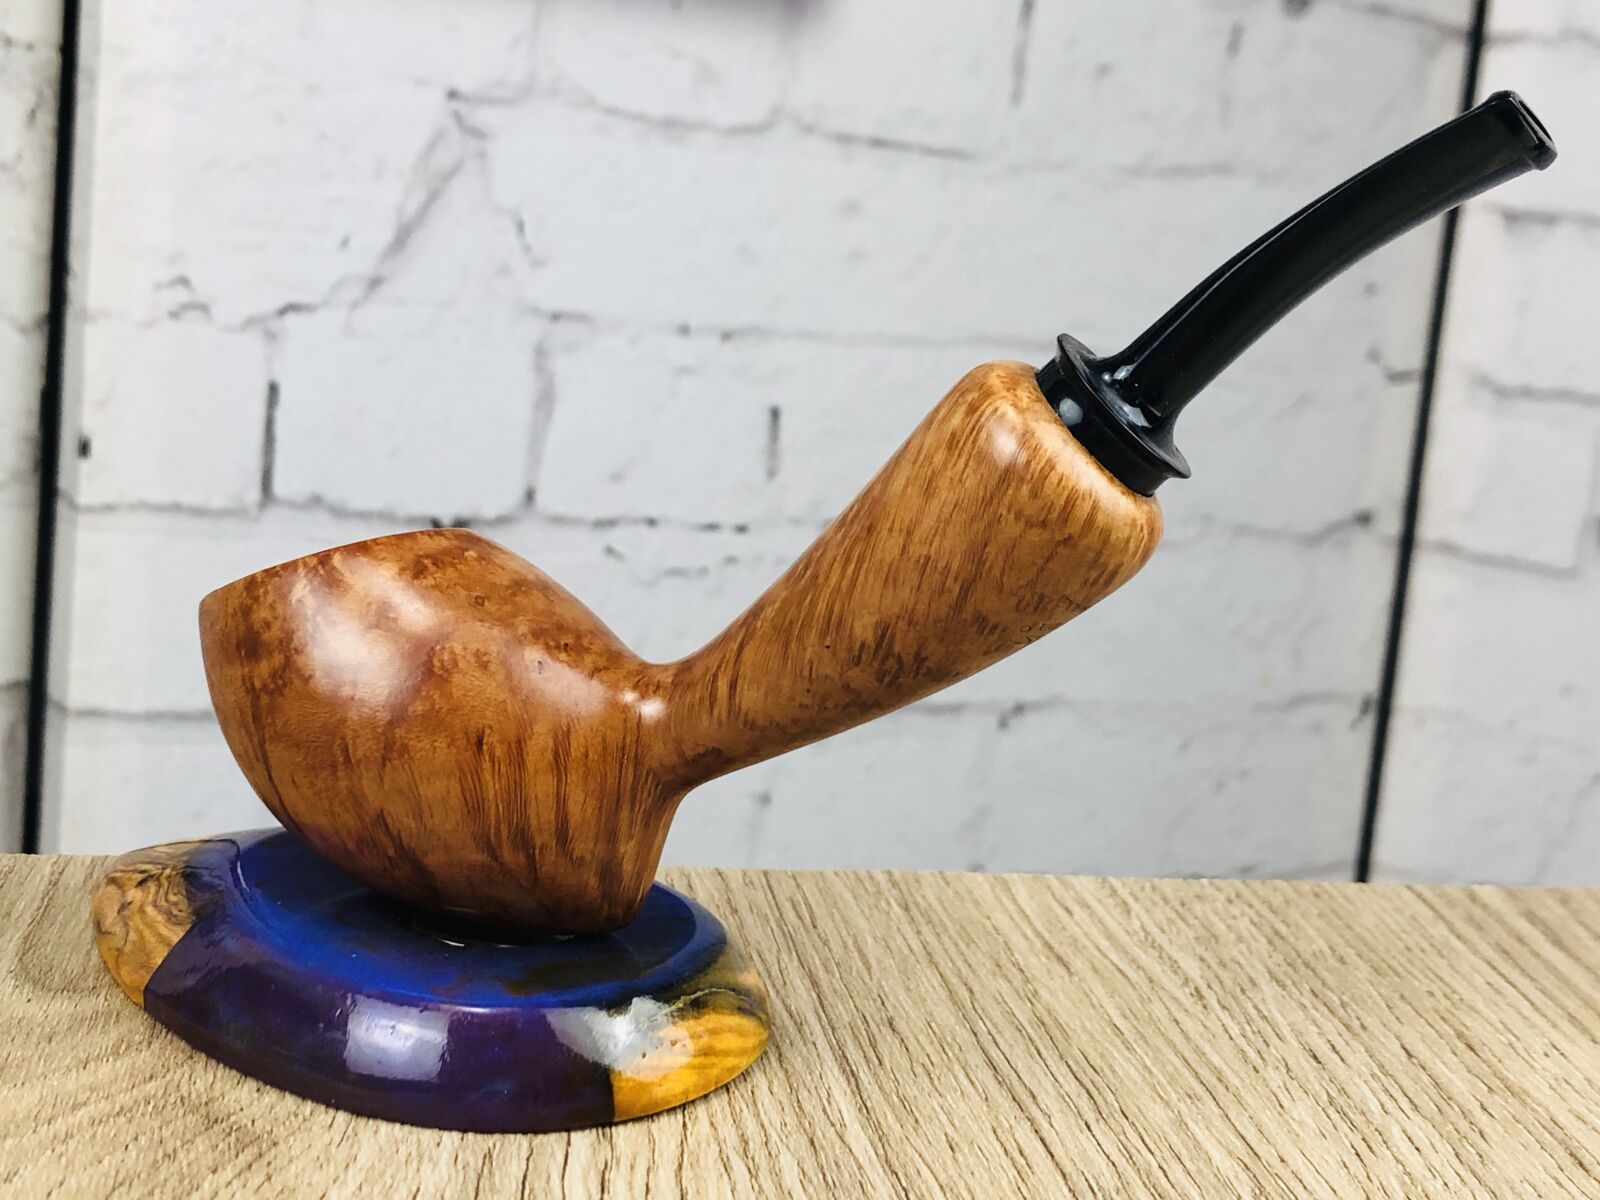 Apple iPhone X sample photo. Pipe, smoking pipe photography